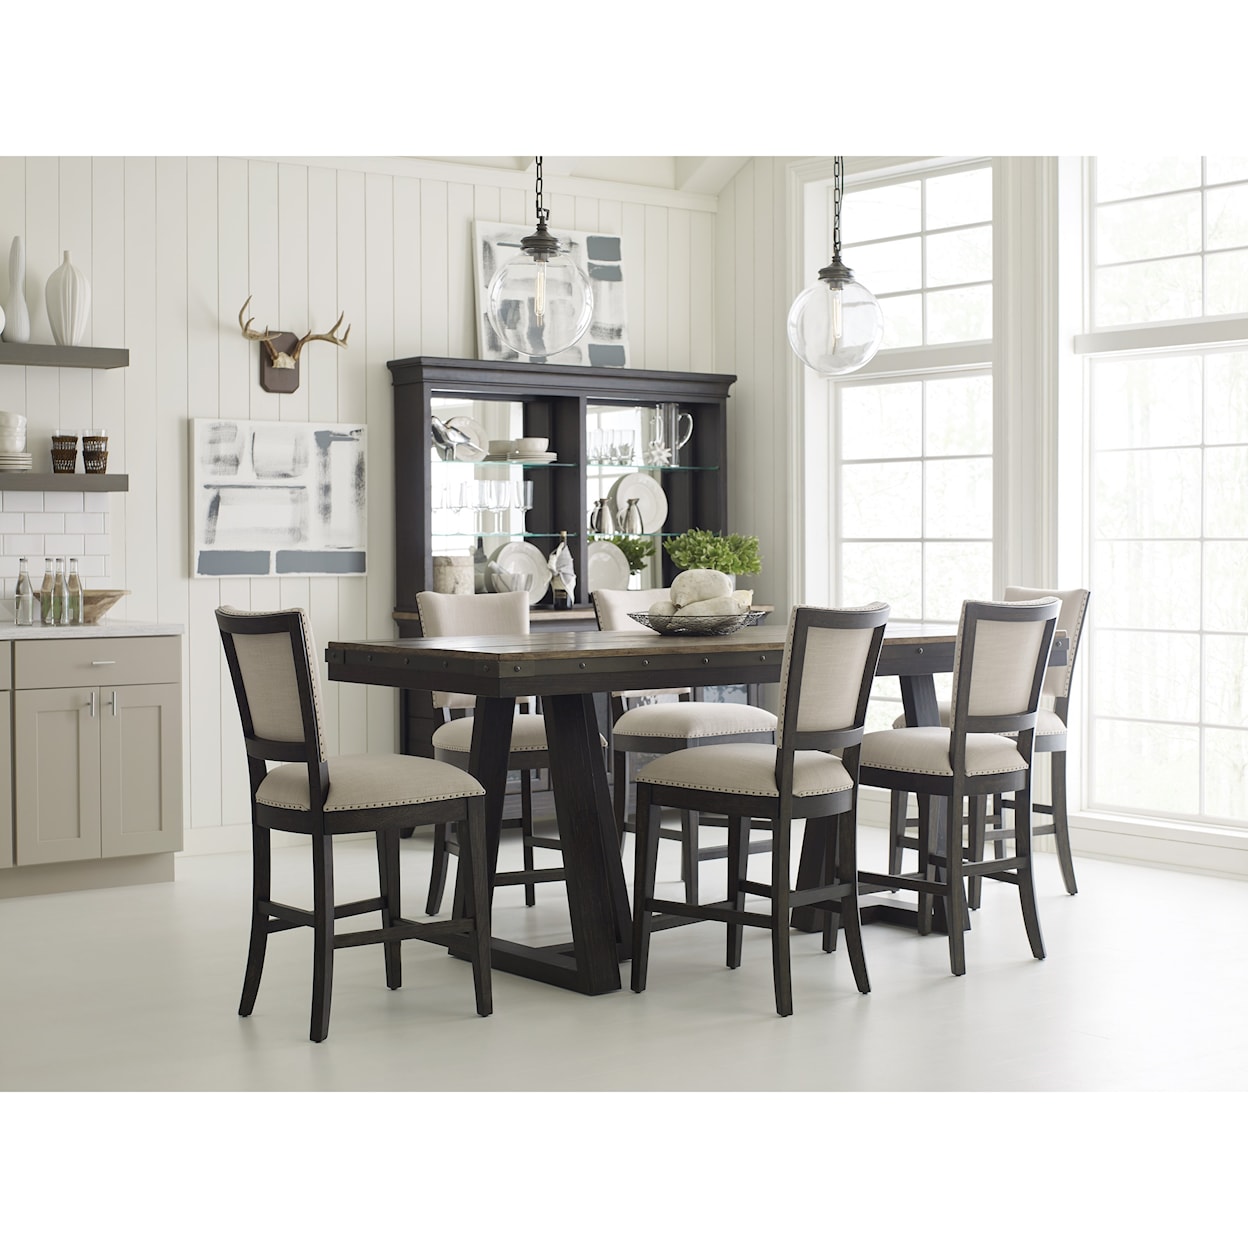 Kincaid Furniture Plank Road Formal Counter Height Dining Room Set